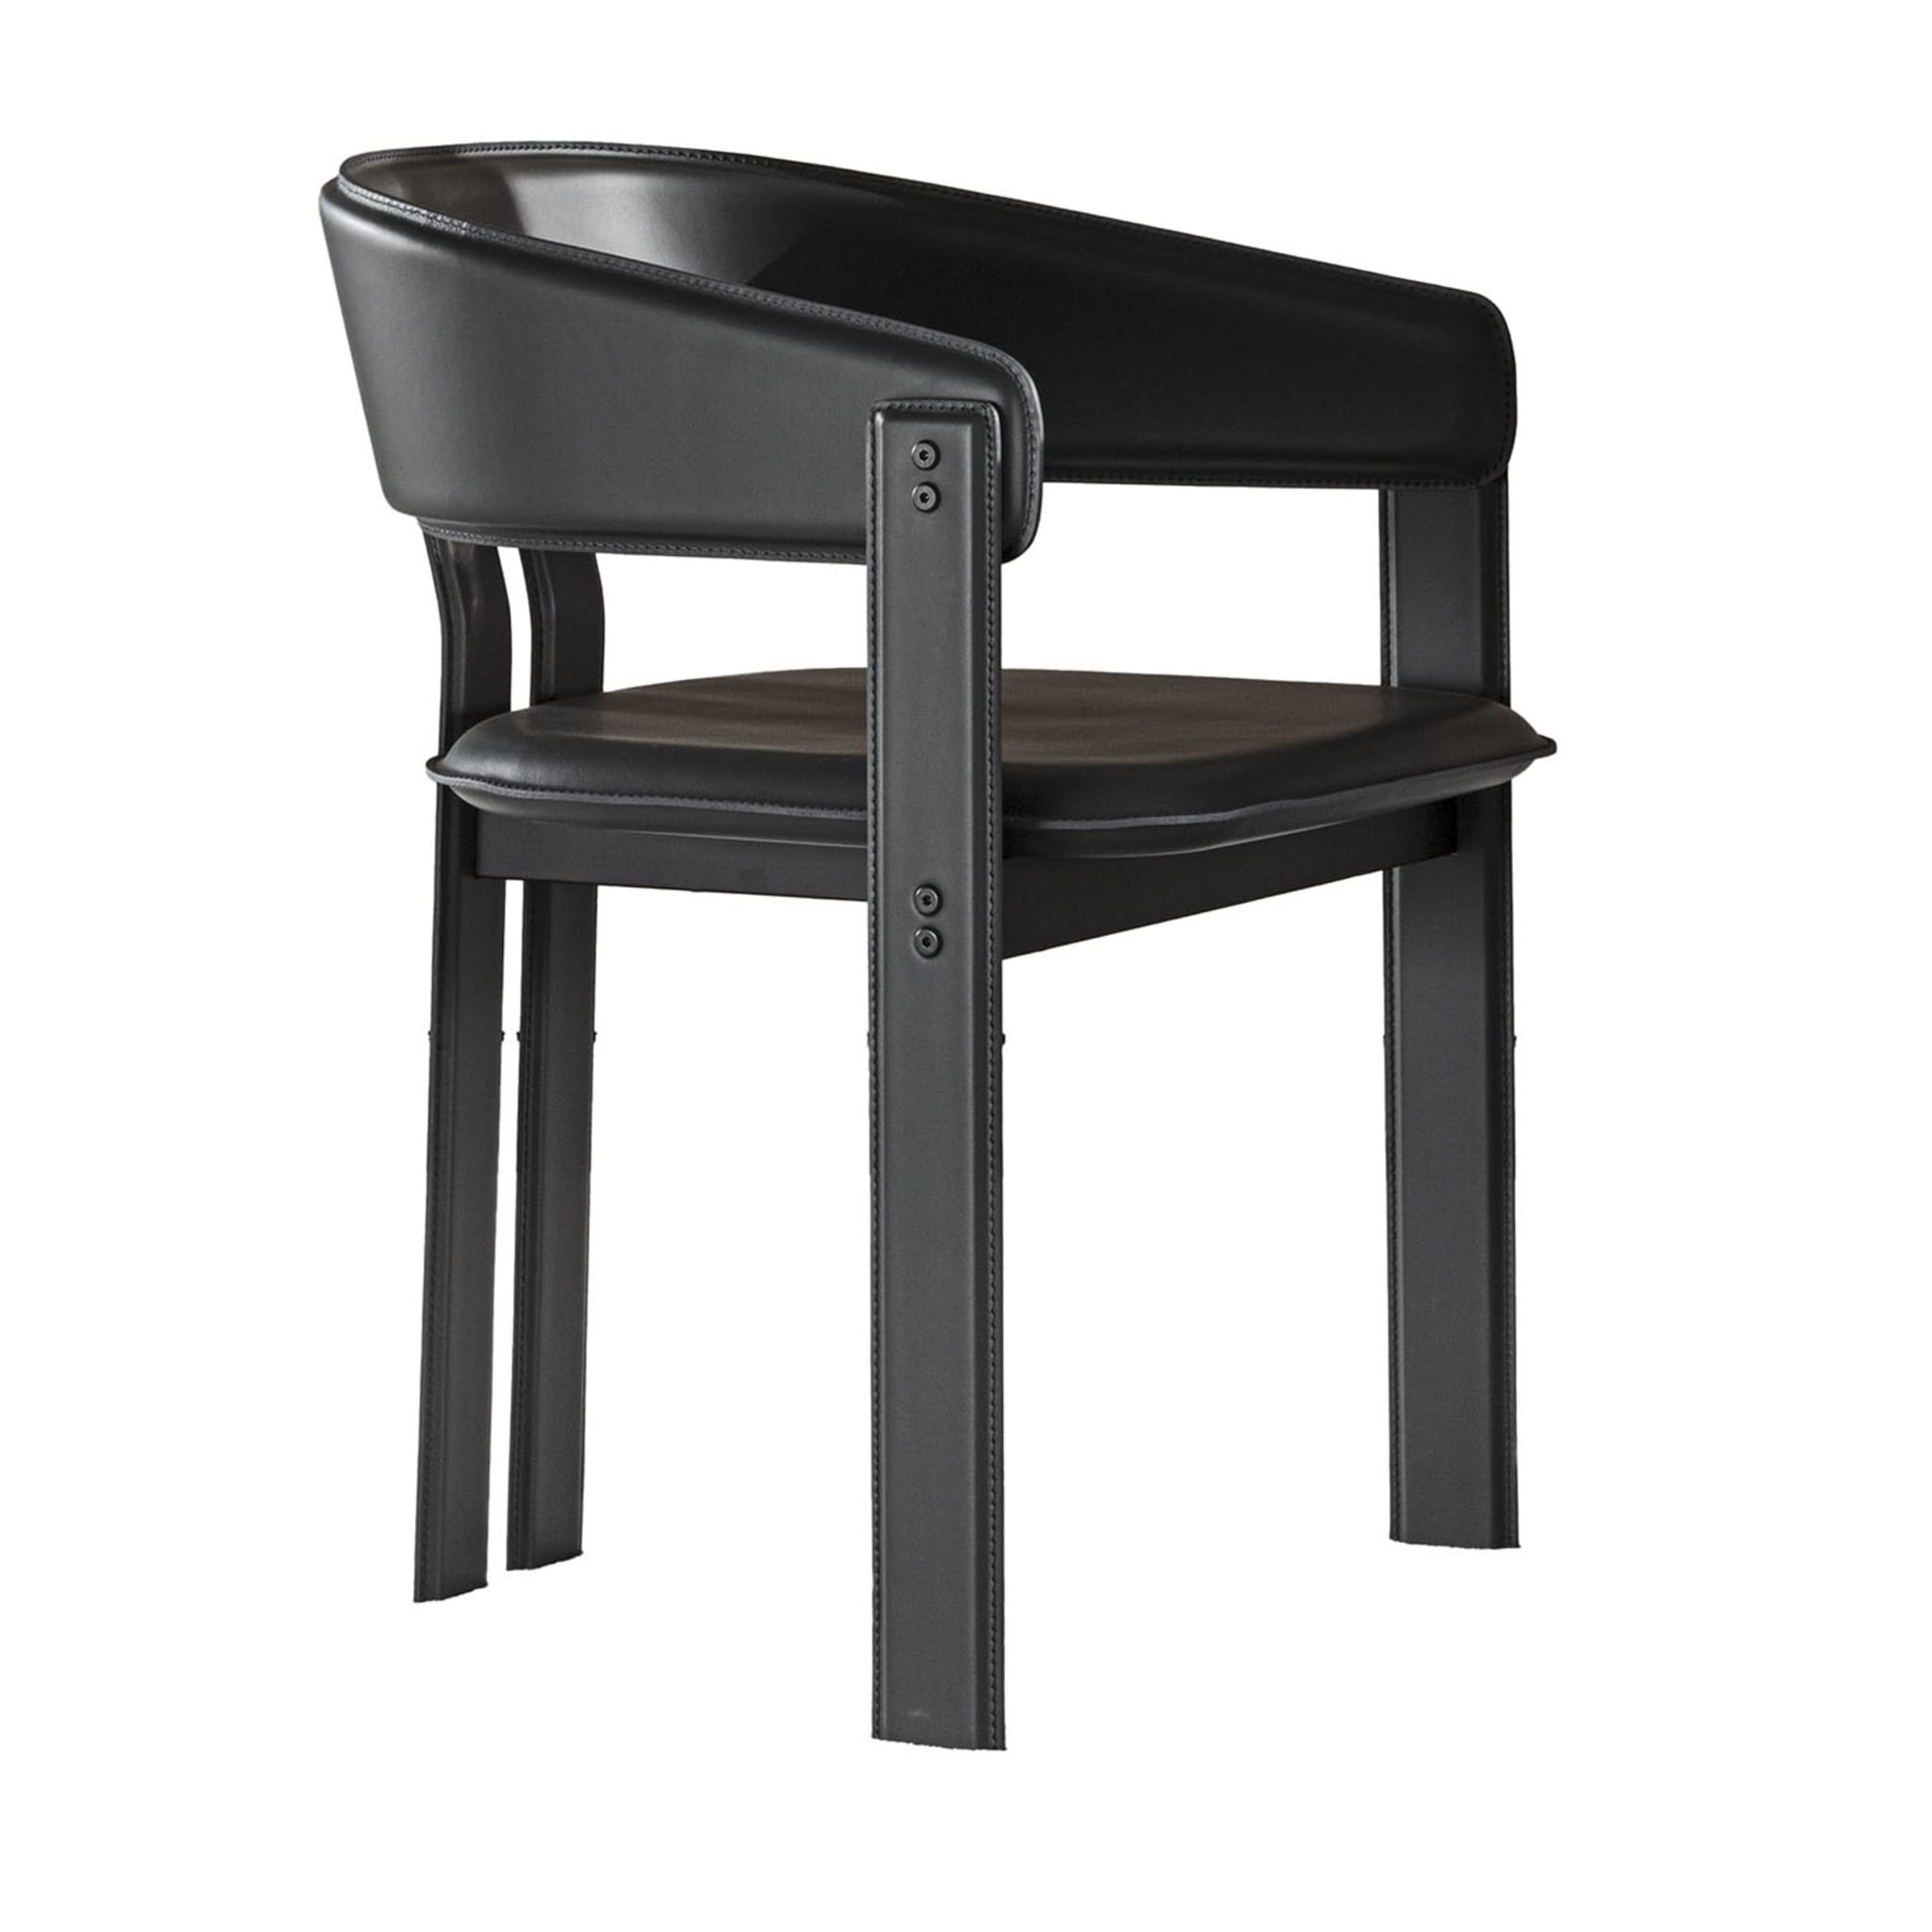 Igea Arm Black Leather Chair - Main view